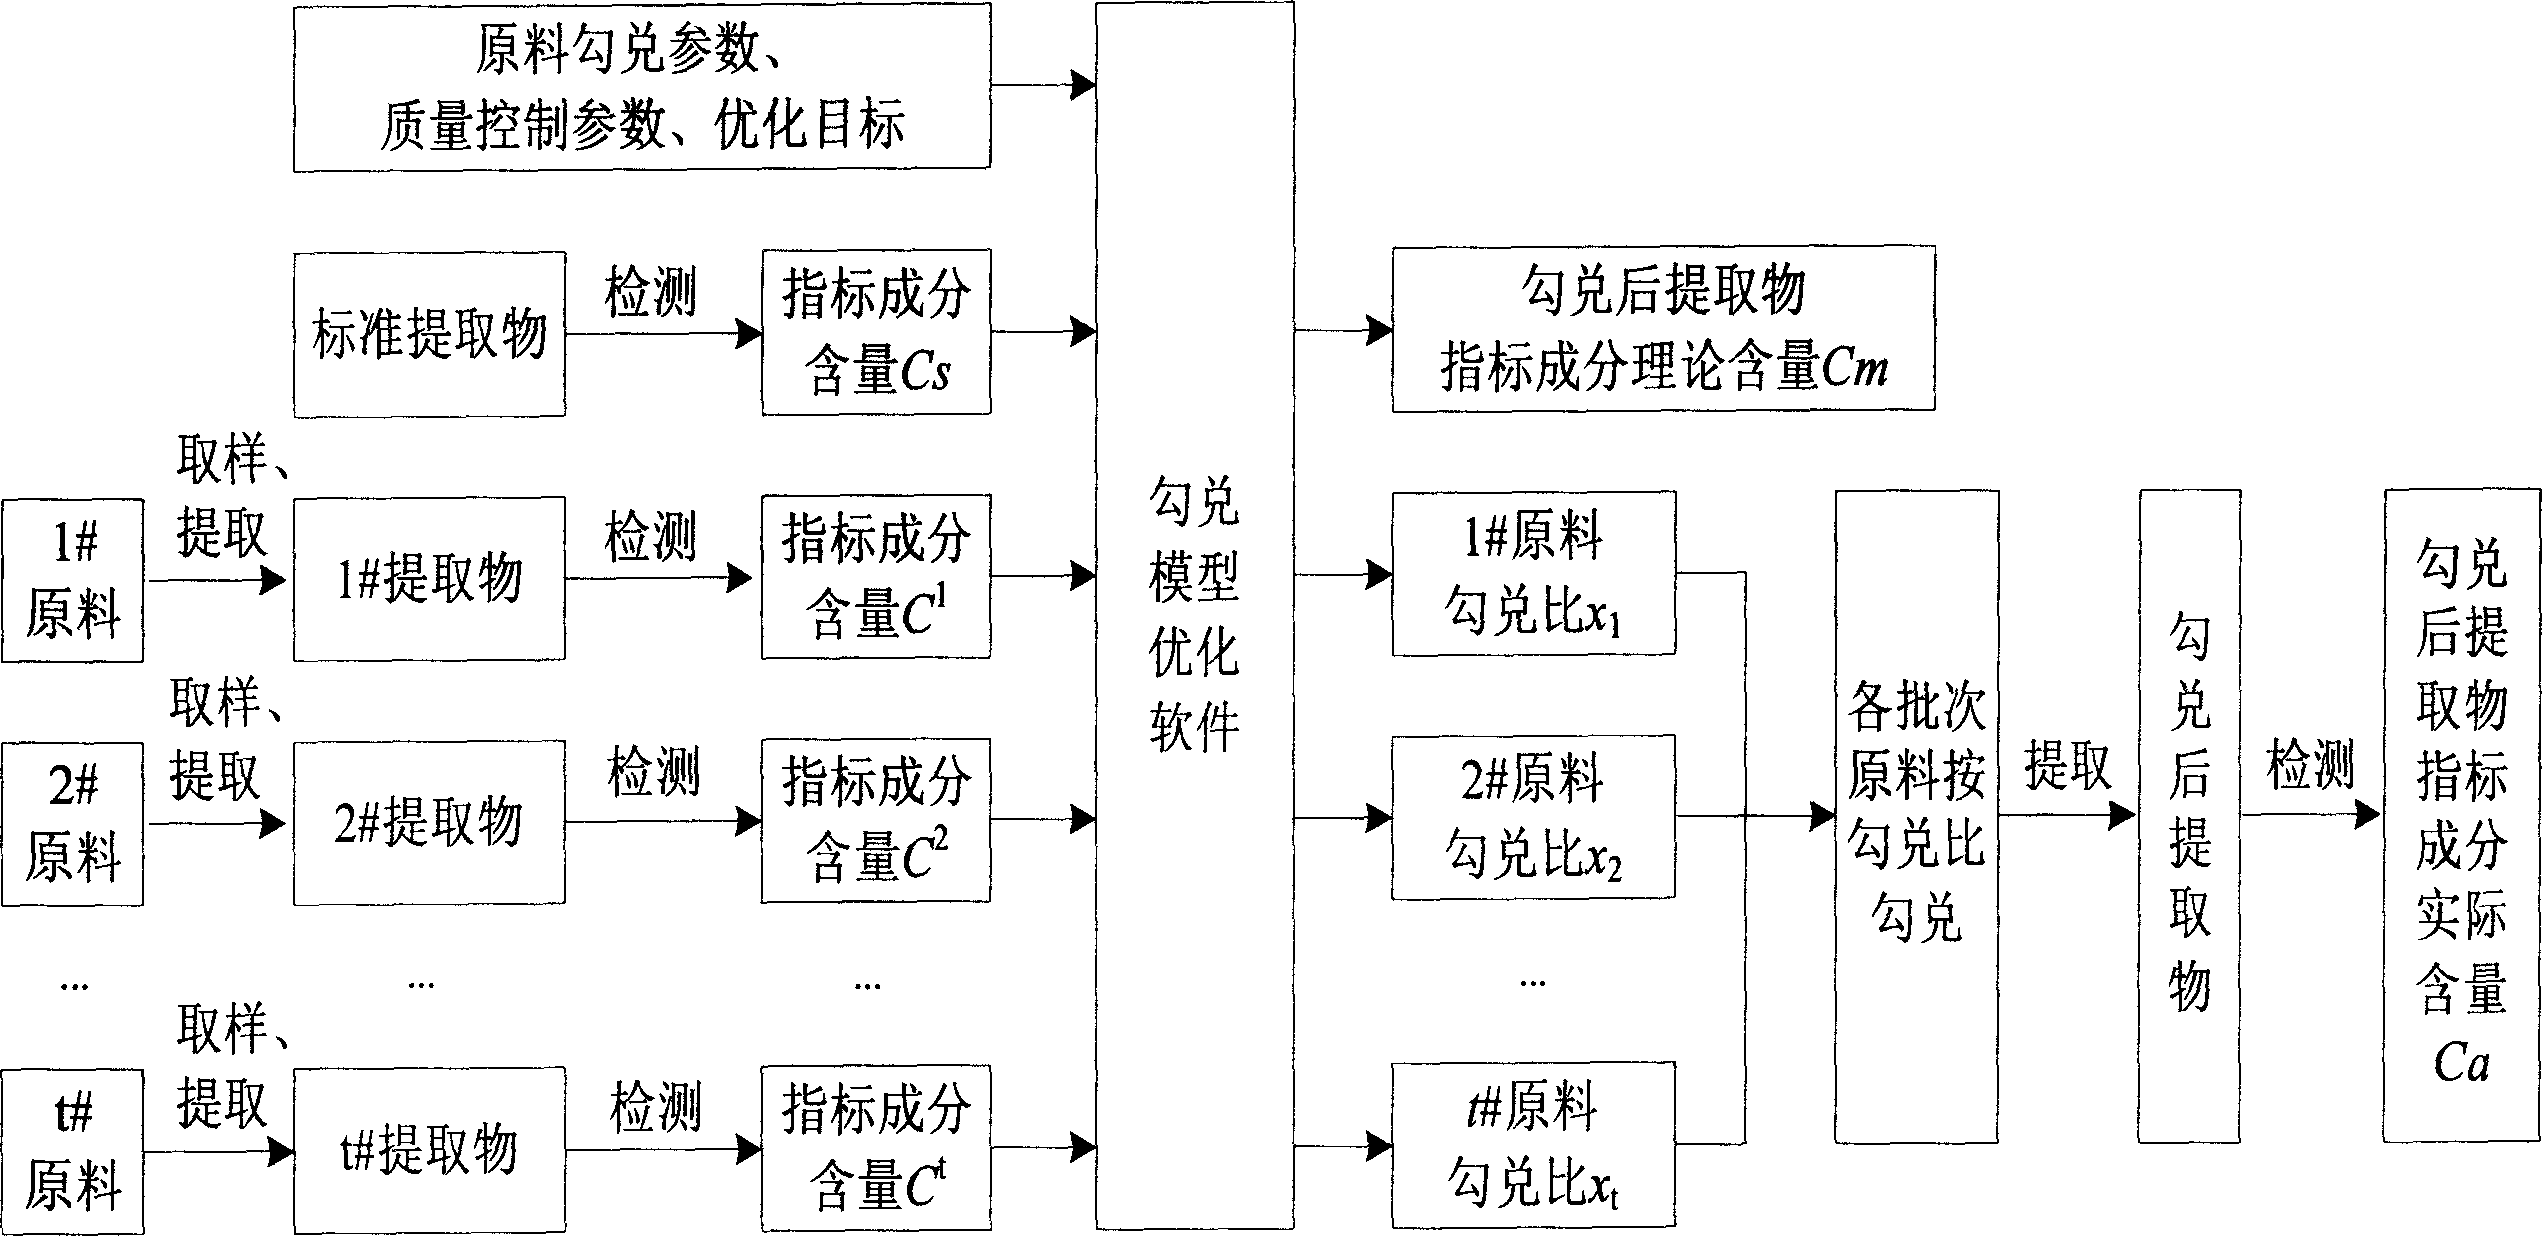 Method for preparing Chinese herbs or natural product to make extract component stable